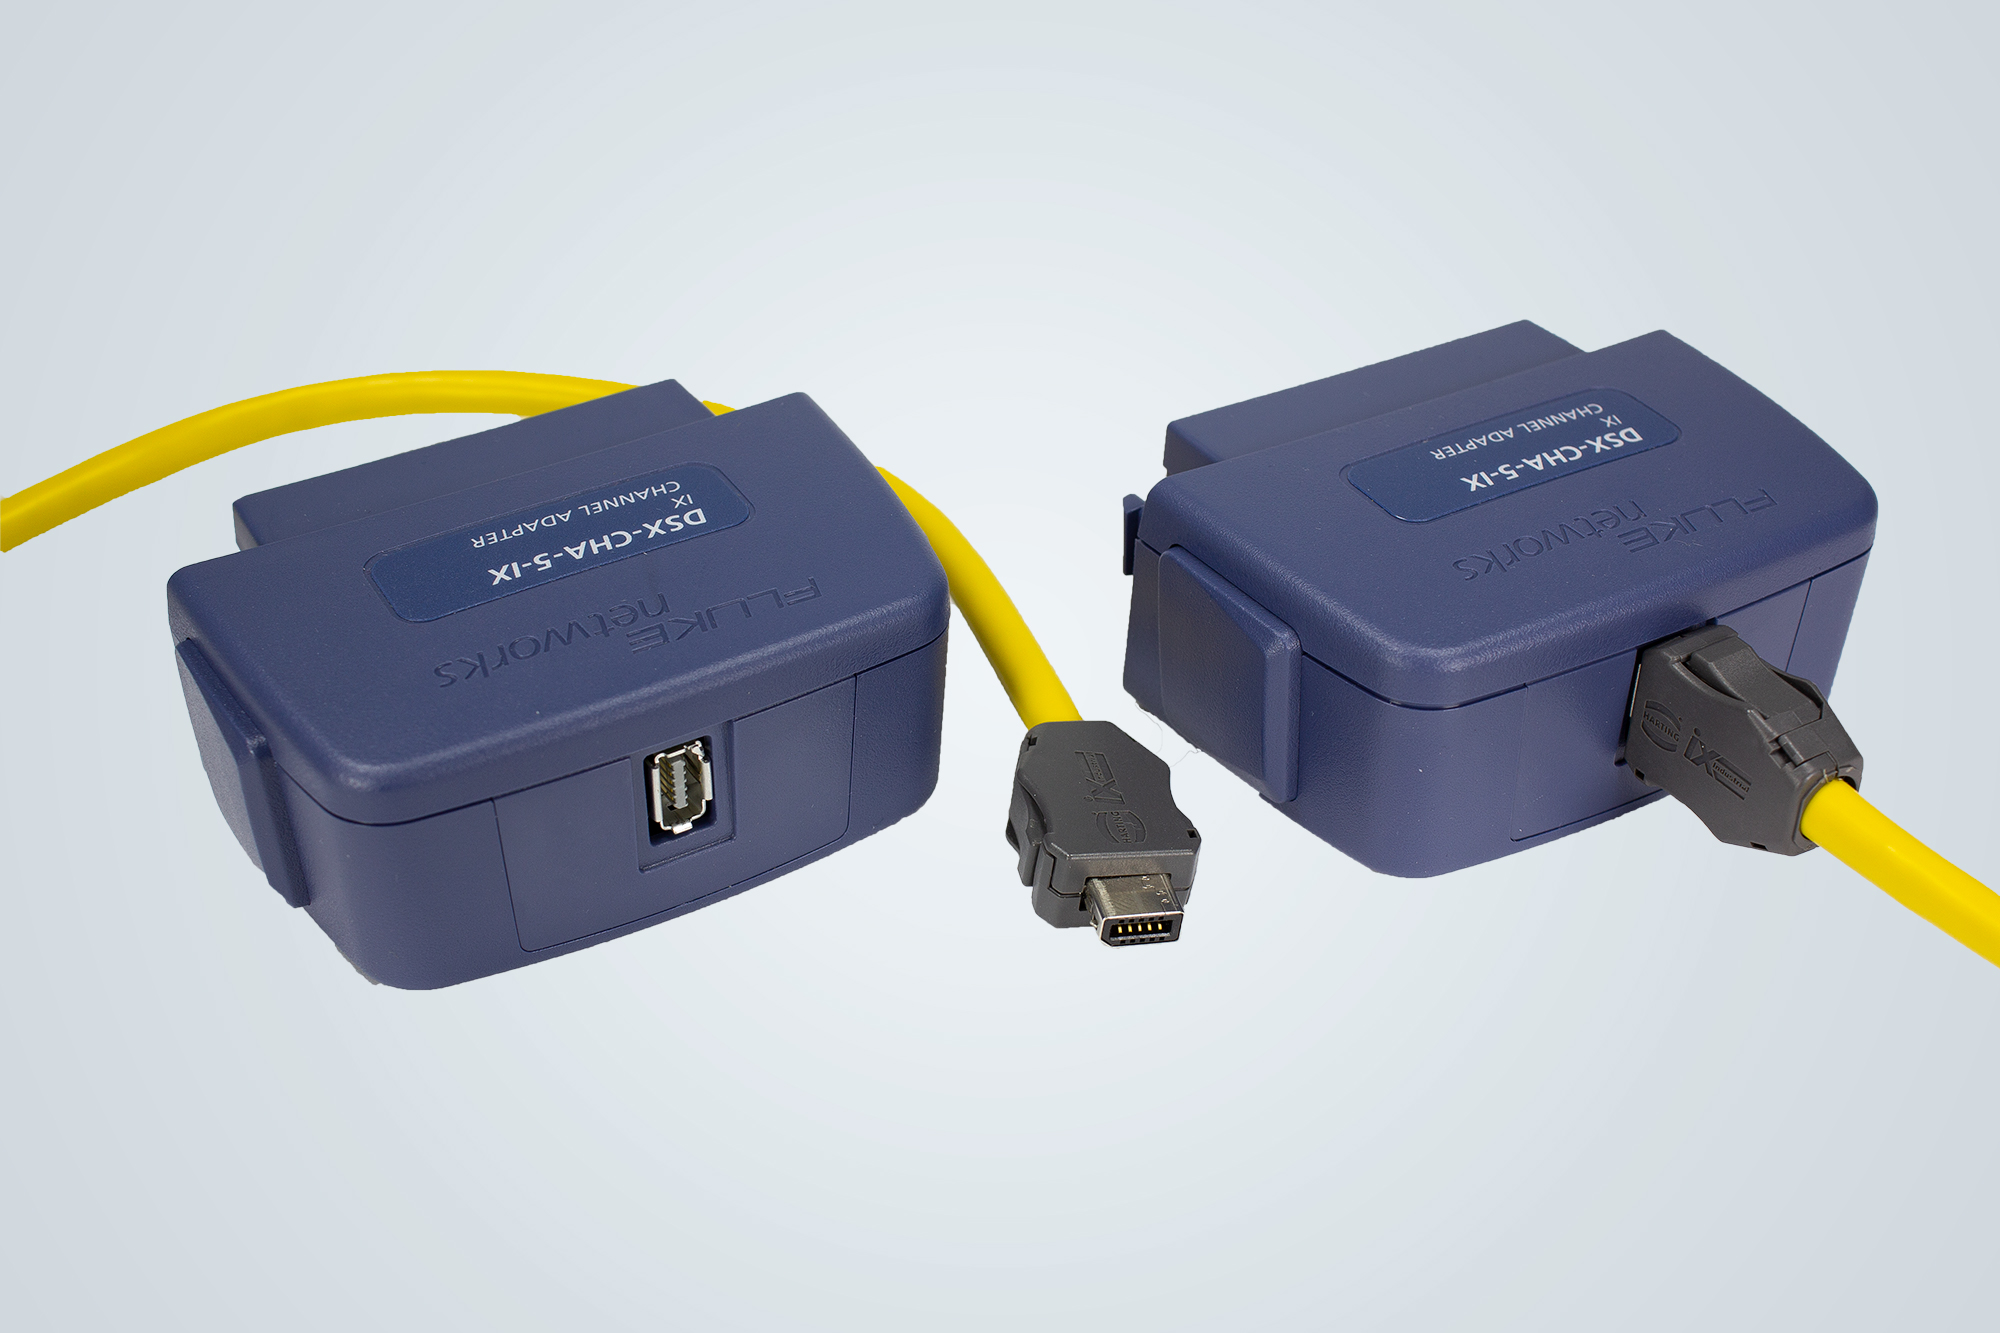 Cable adapter provides easy access to industrial cabling systems for test engineers to perform certification